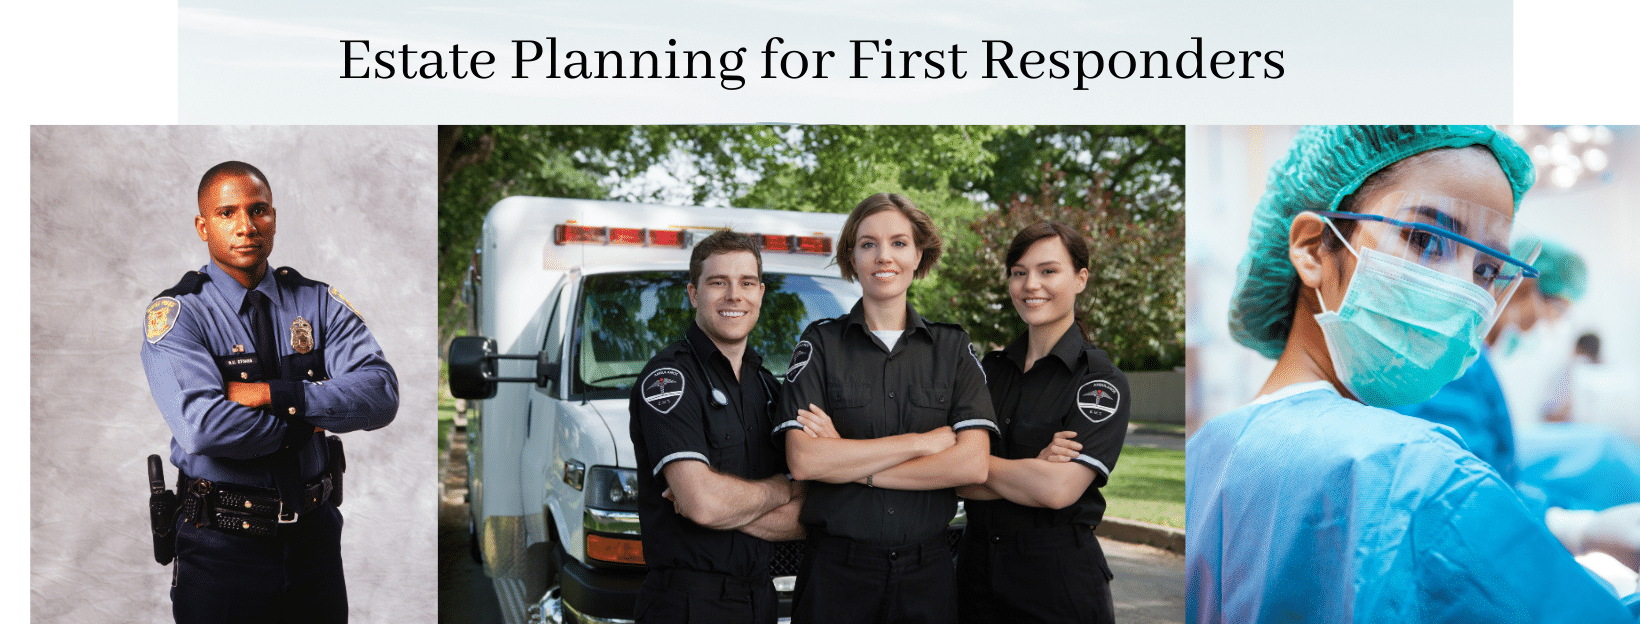 Estate Planning for First Responders - The Ultimate Guide